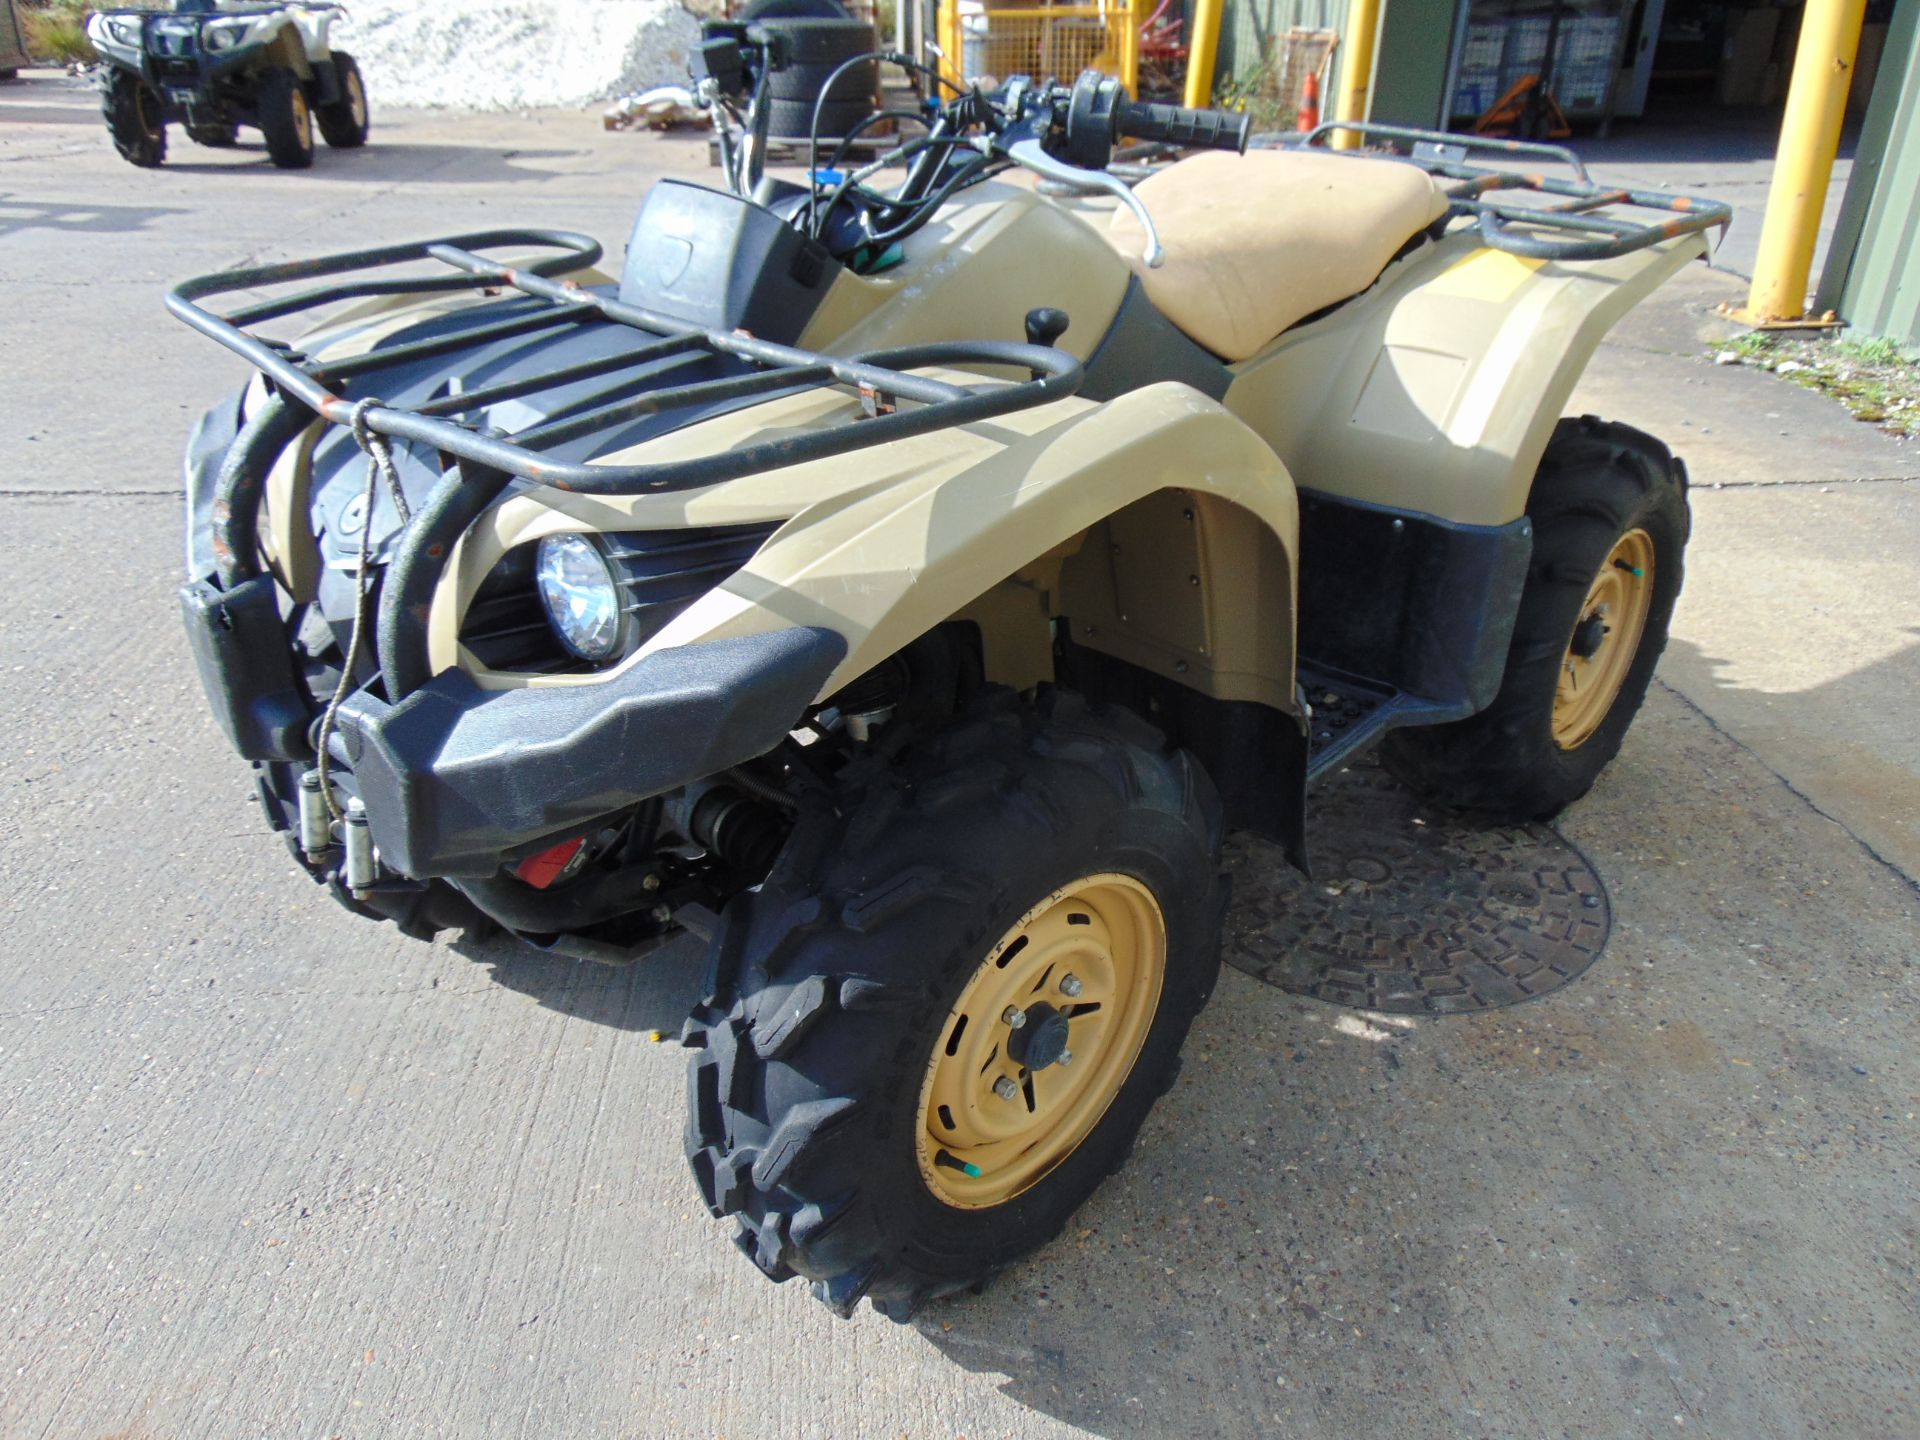 Military Specification Yamaha Grizzly 450 4 x 4 ATV Quad Bike - Image 3 of 14